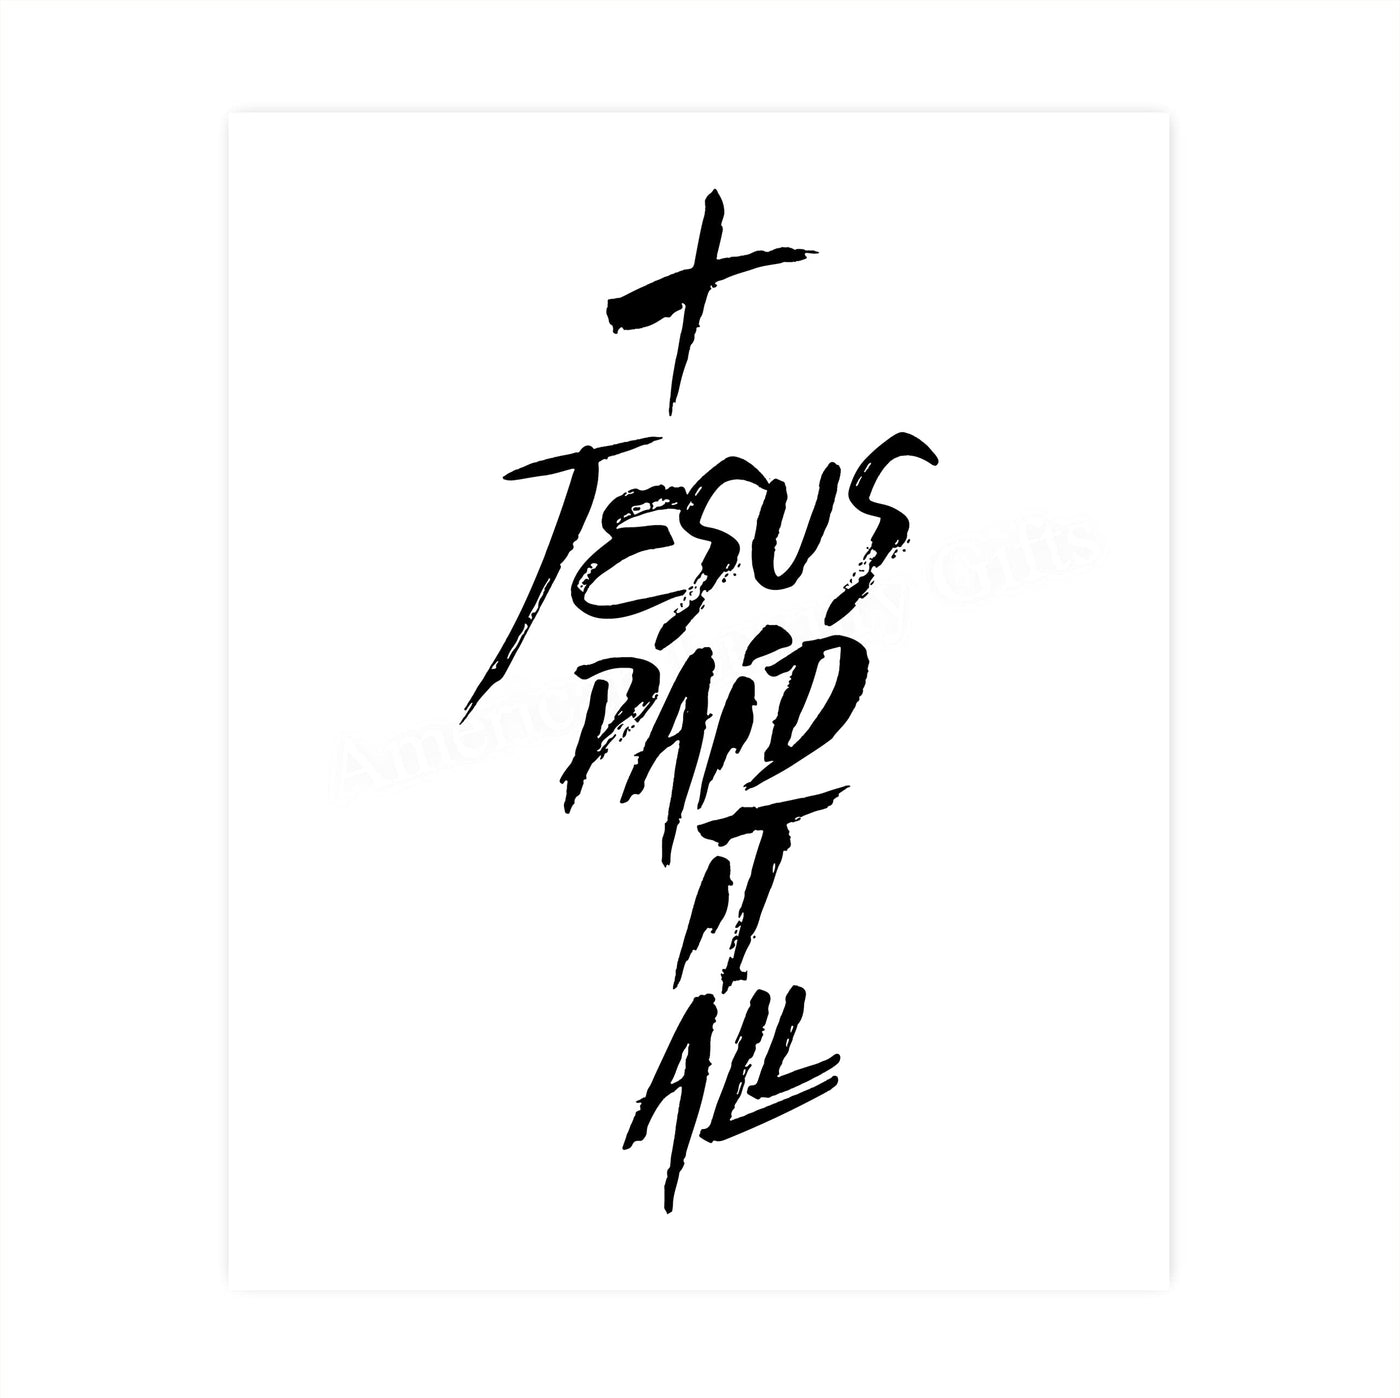 Jesus Paid It All- Inspirational Christian Wall Decor -8 x 10" Modern Typographic Art Print-Ready to Frame. Religious Home-Office-Church-School Decor. Contemporary Look- Makes a Great Gift!